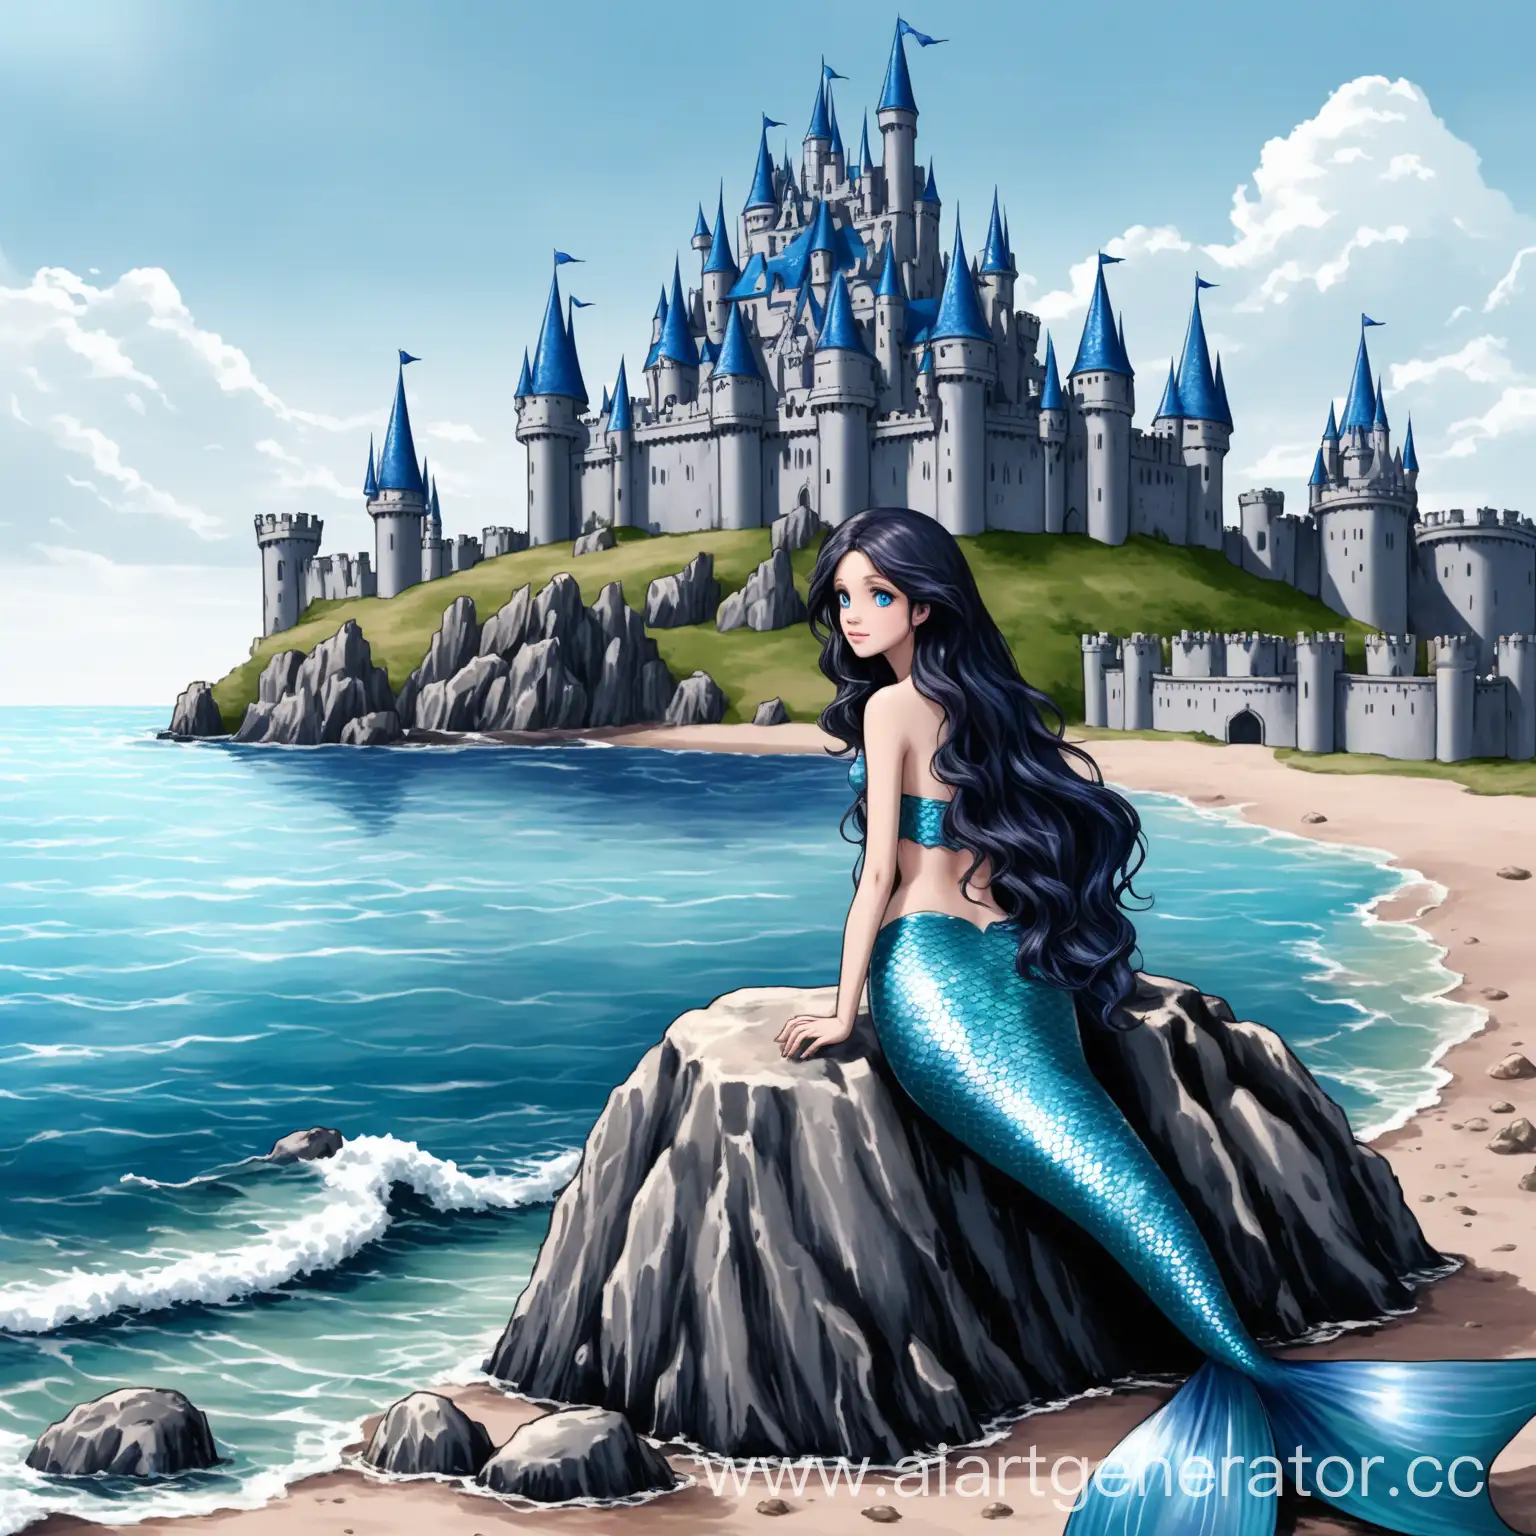 Mermaid-with-SilverBlue-Tail-Gazing-at-Castle-by-the-Sea